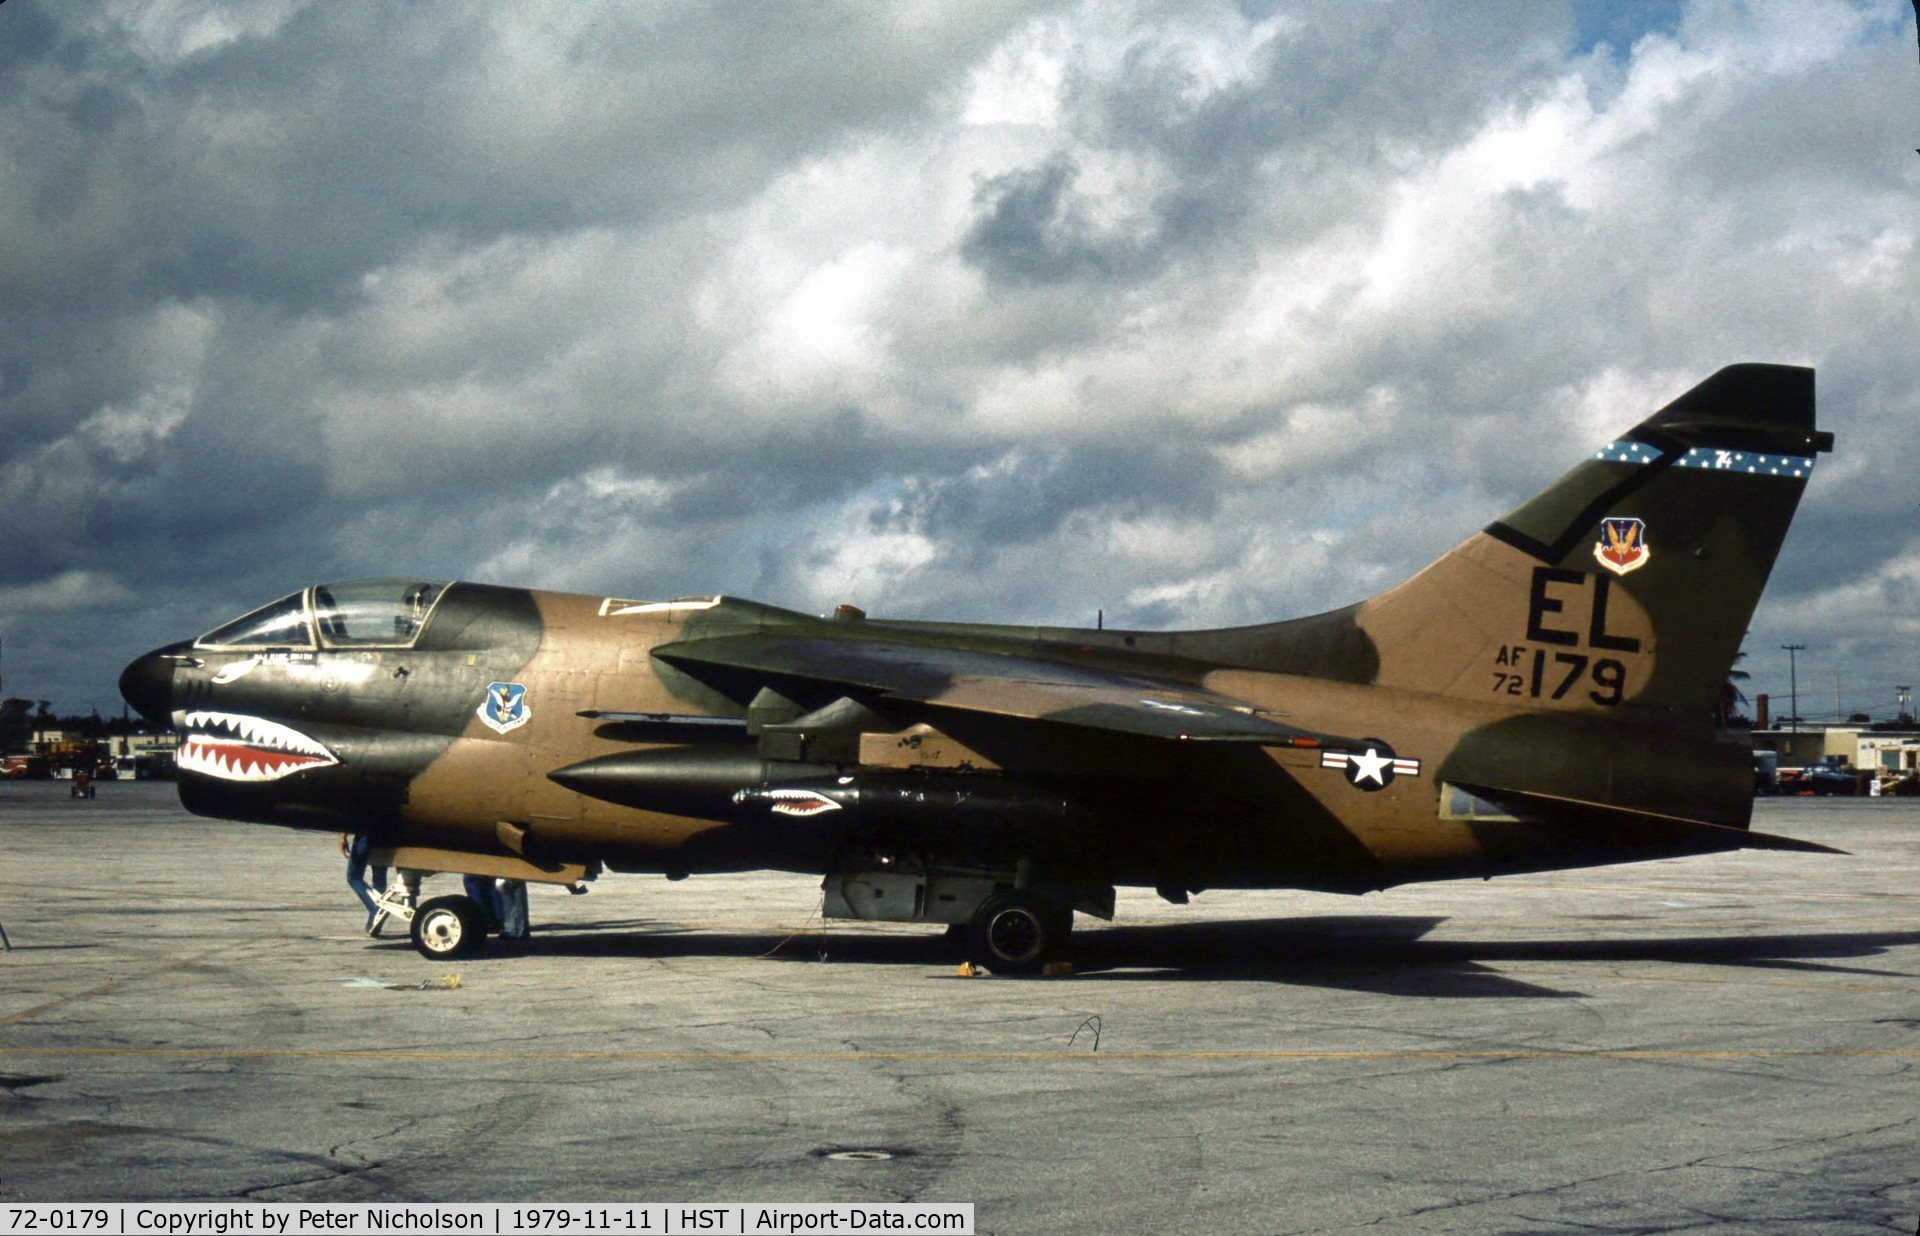 72-0179, 1972 LTV A-7D Corsair II C/N D-301, A-7D Corsair of 23rd Tactical Fighter Wing on display at the 1979 Homestead AFB Open House.